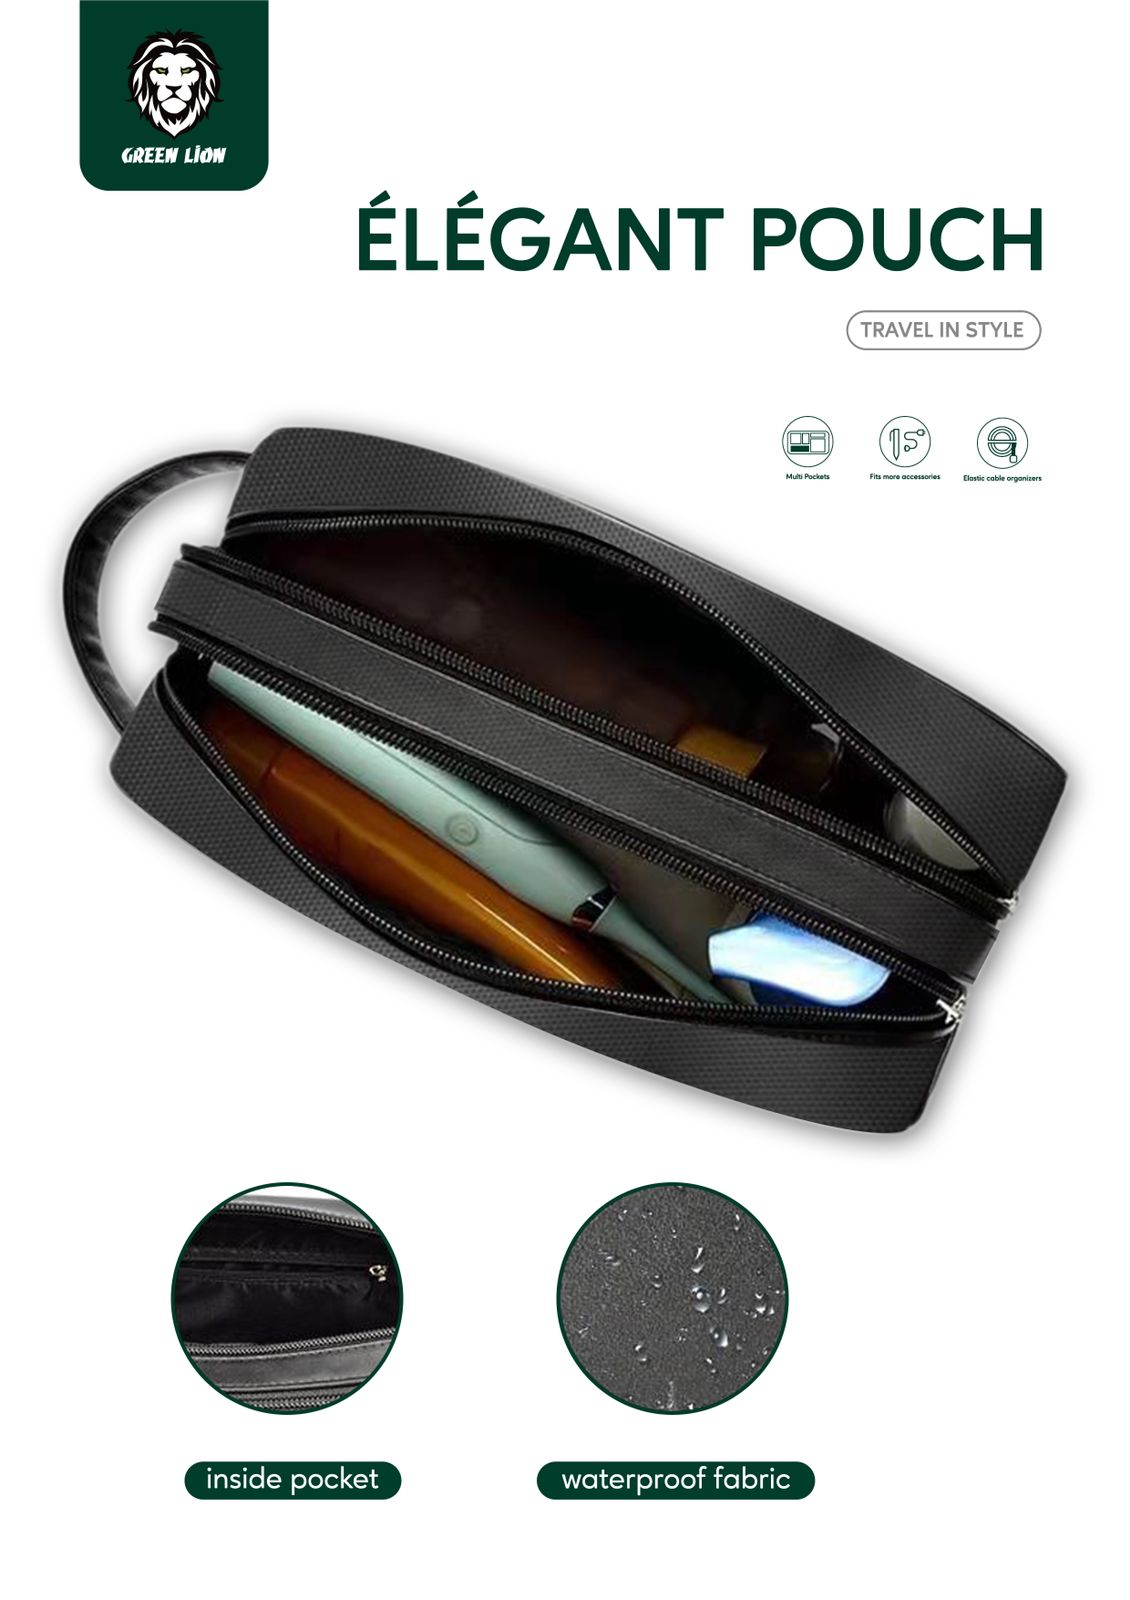 Green Lion Elegant Pouch | For Travel Black | PLUGnPOINT